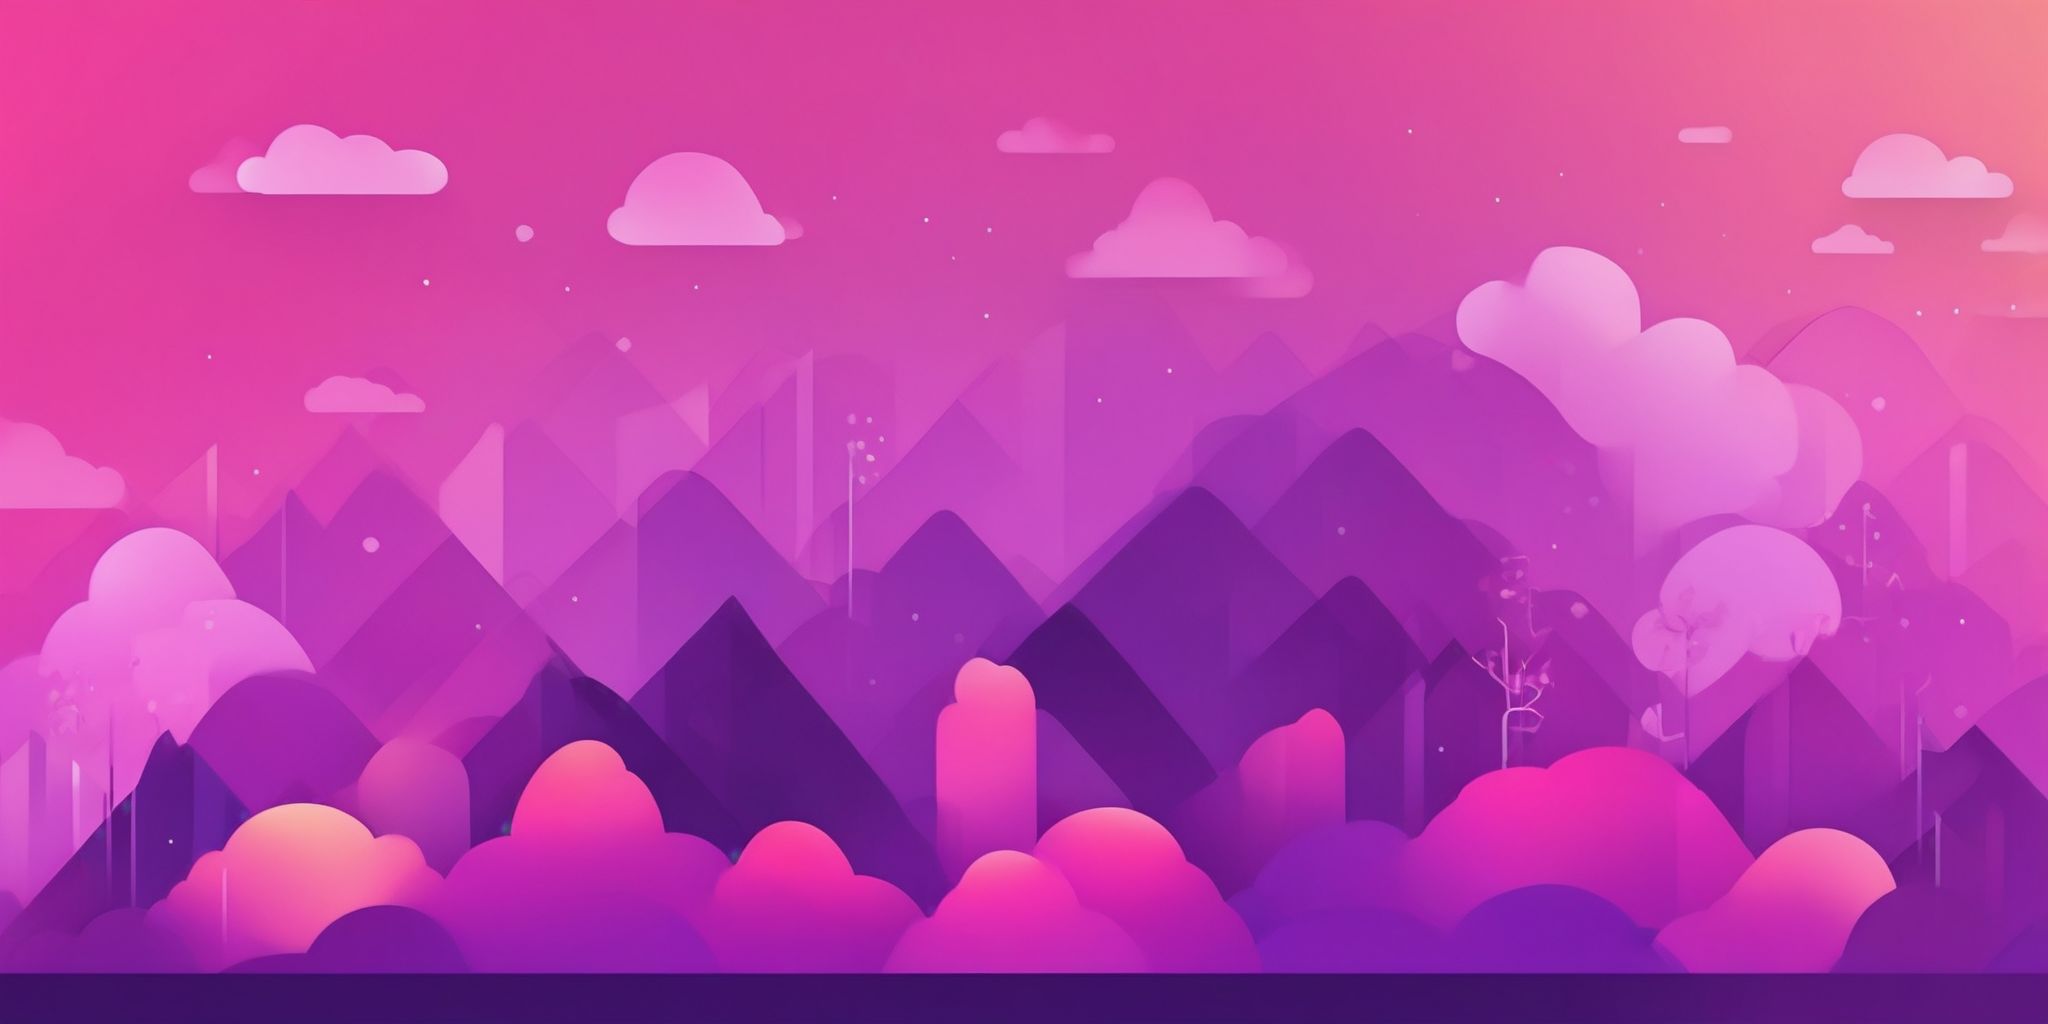 Index in flat illustration style, colorful purple gradient colors